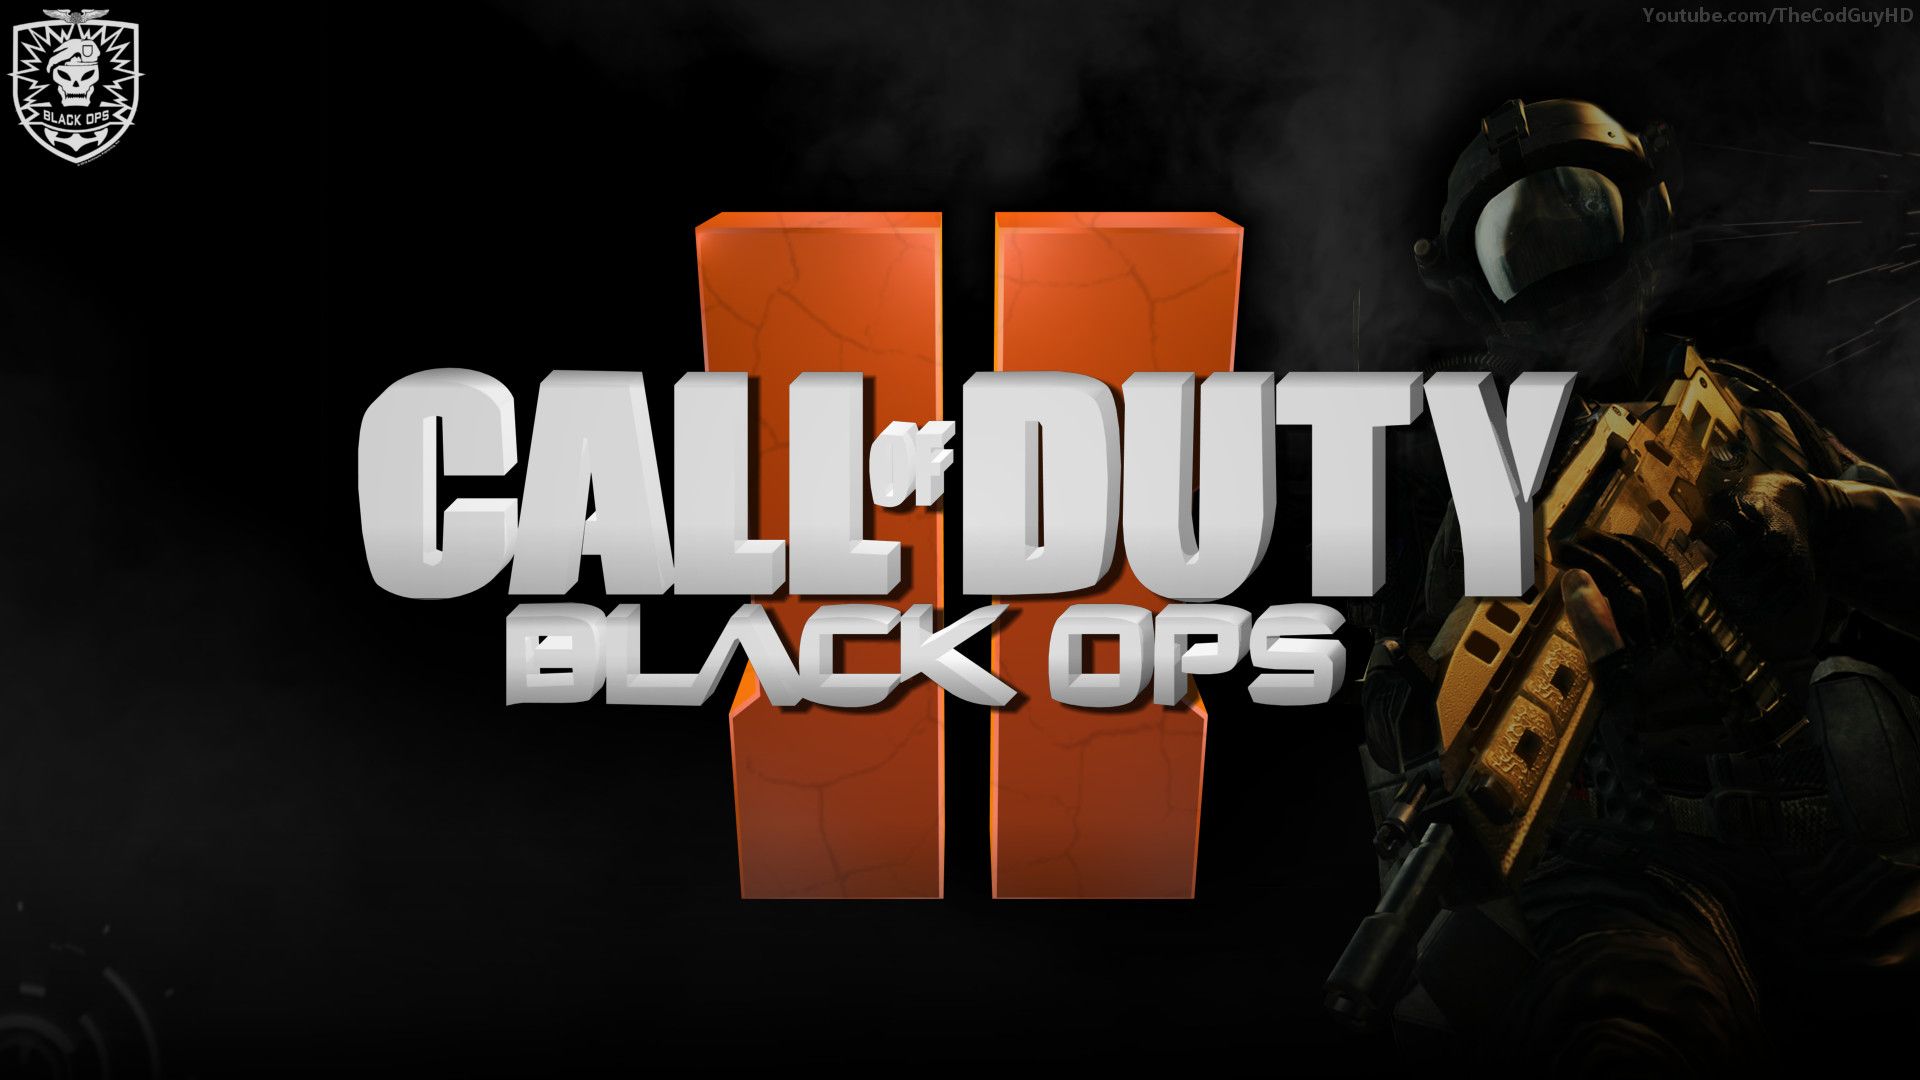 Call of duty wallpaper black ops 2 wallpaper by TheCodGuy